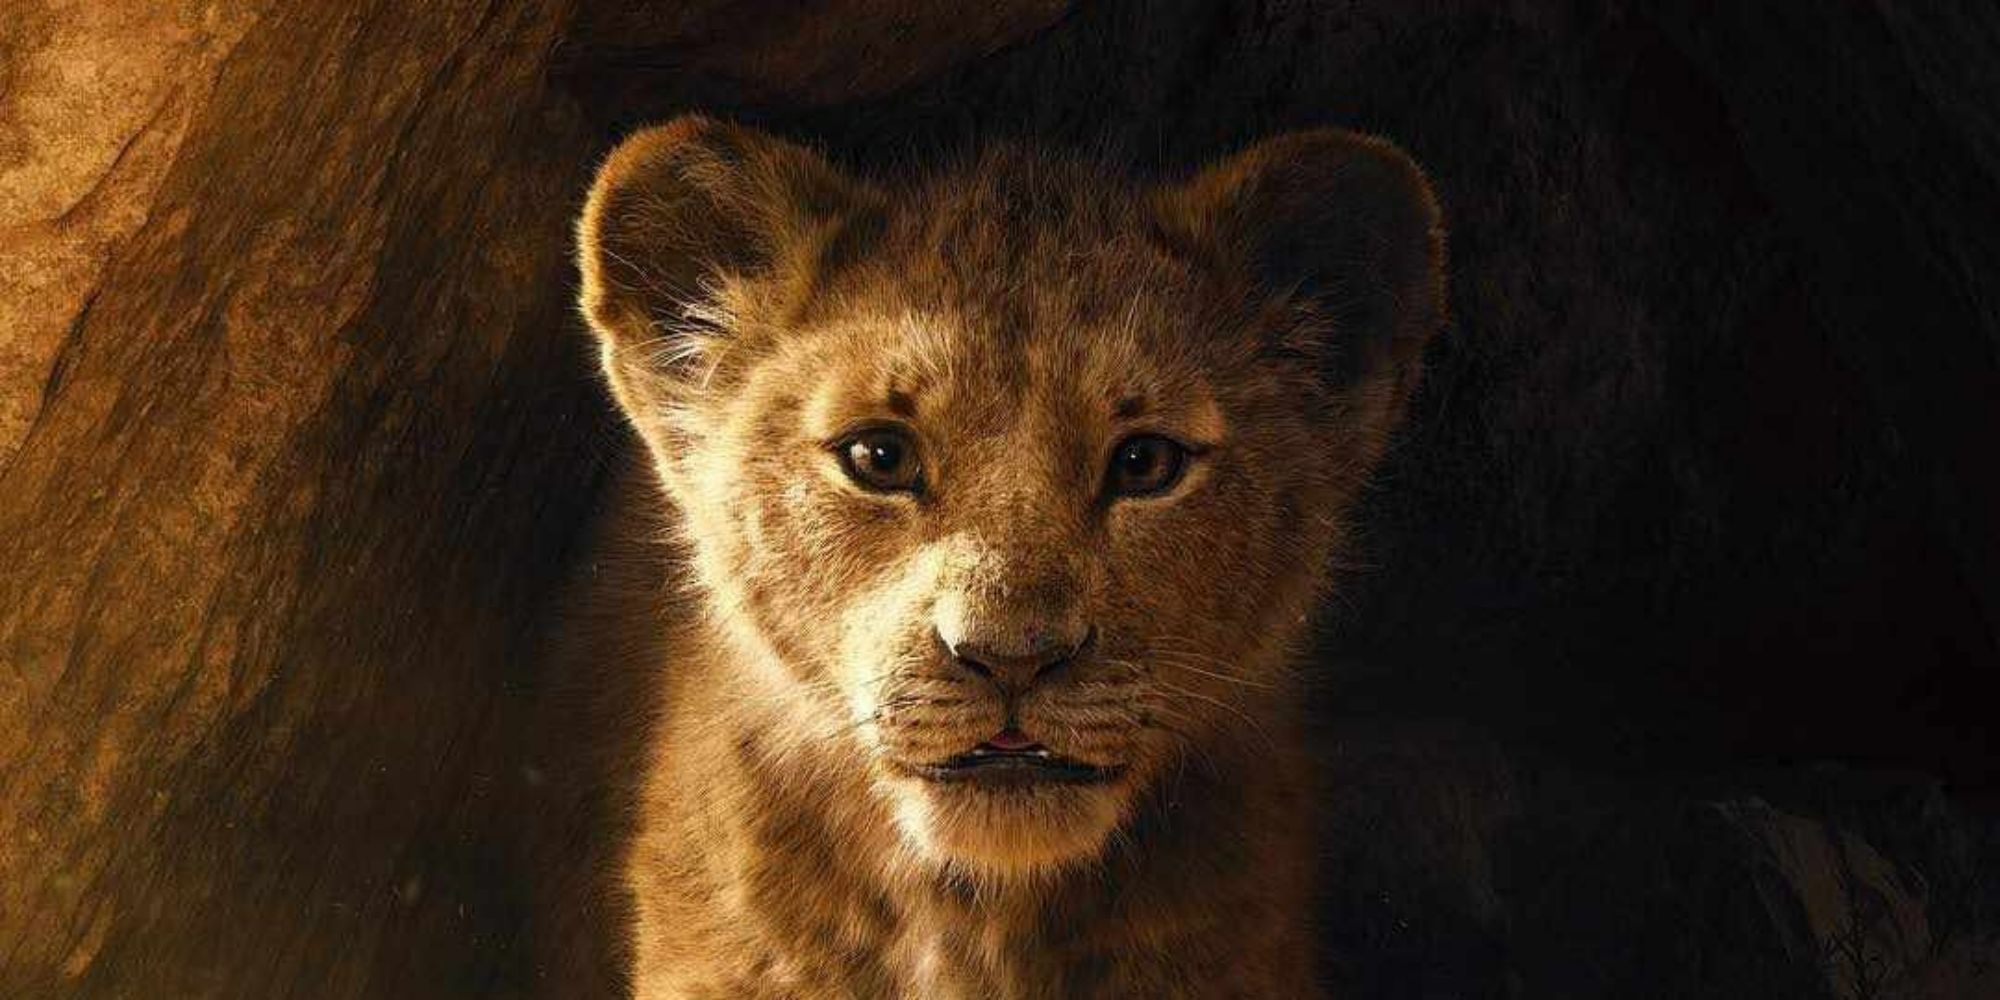 The Lion King remake poster